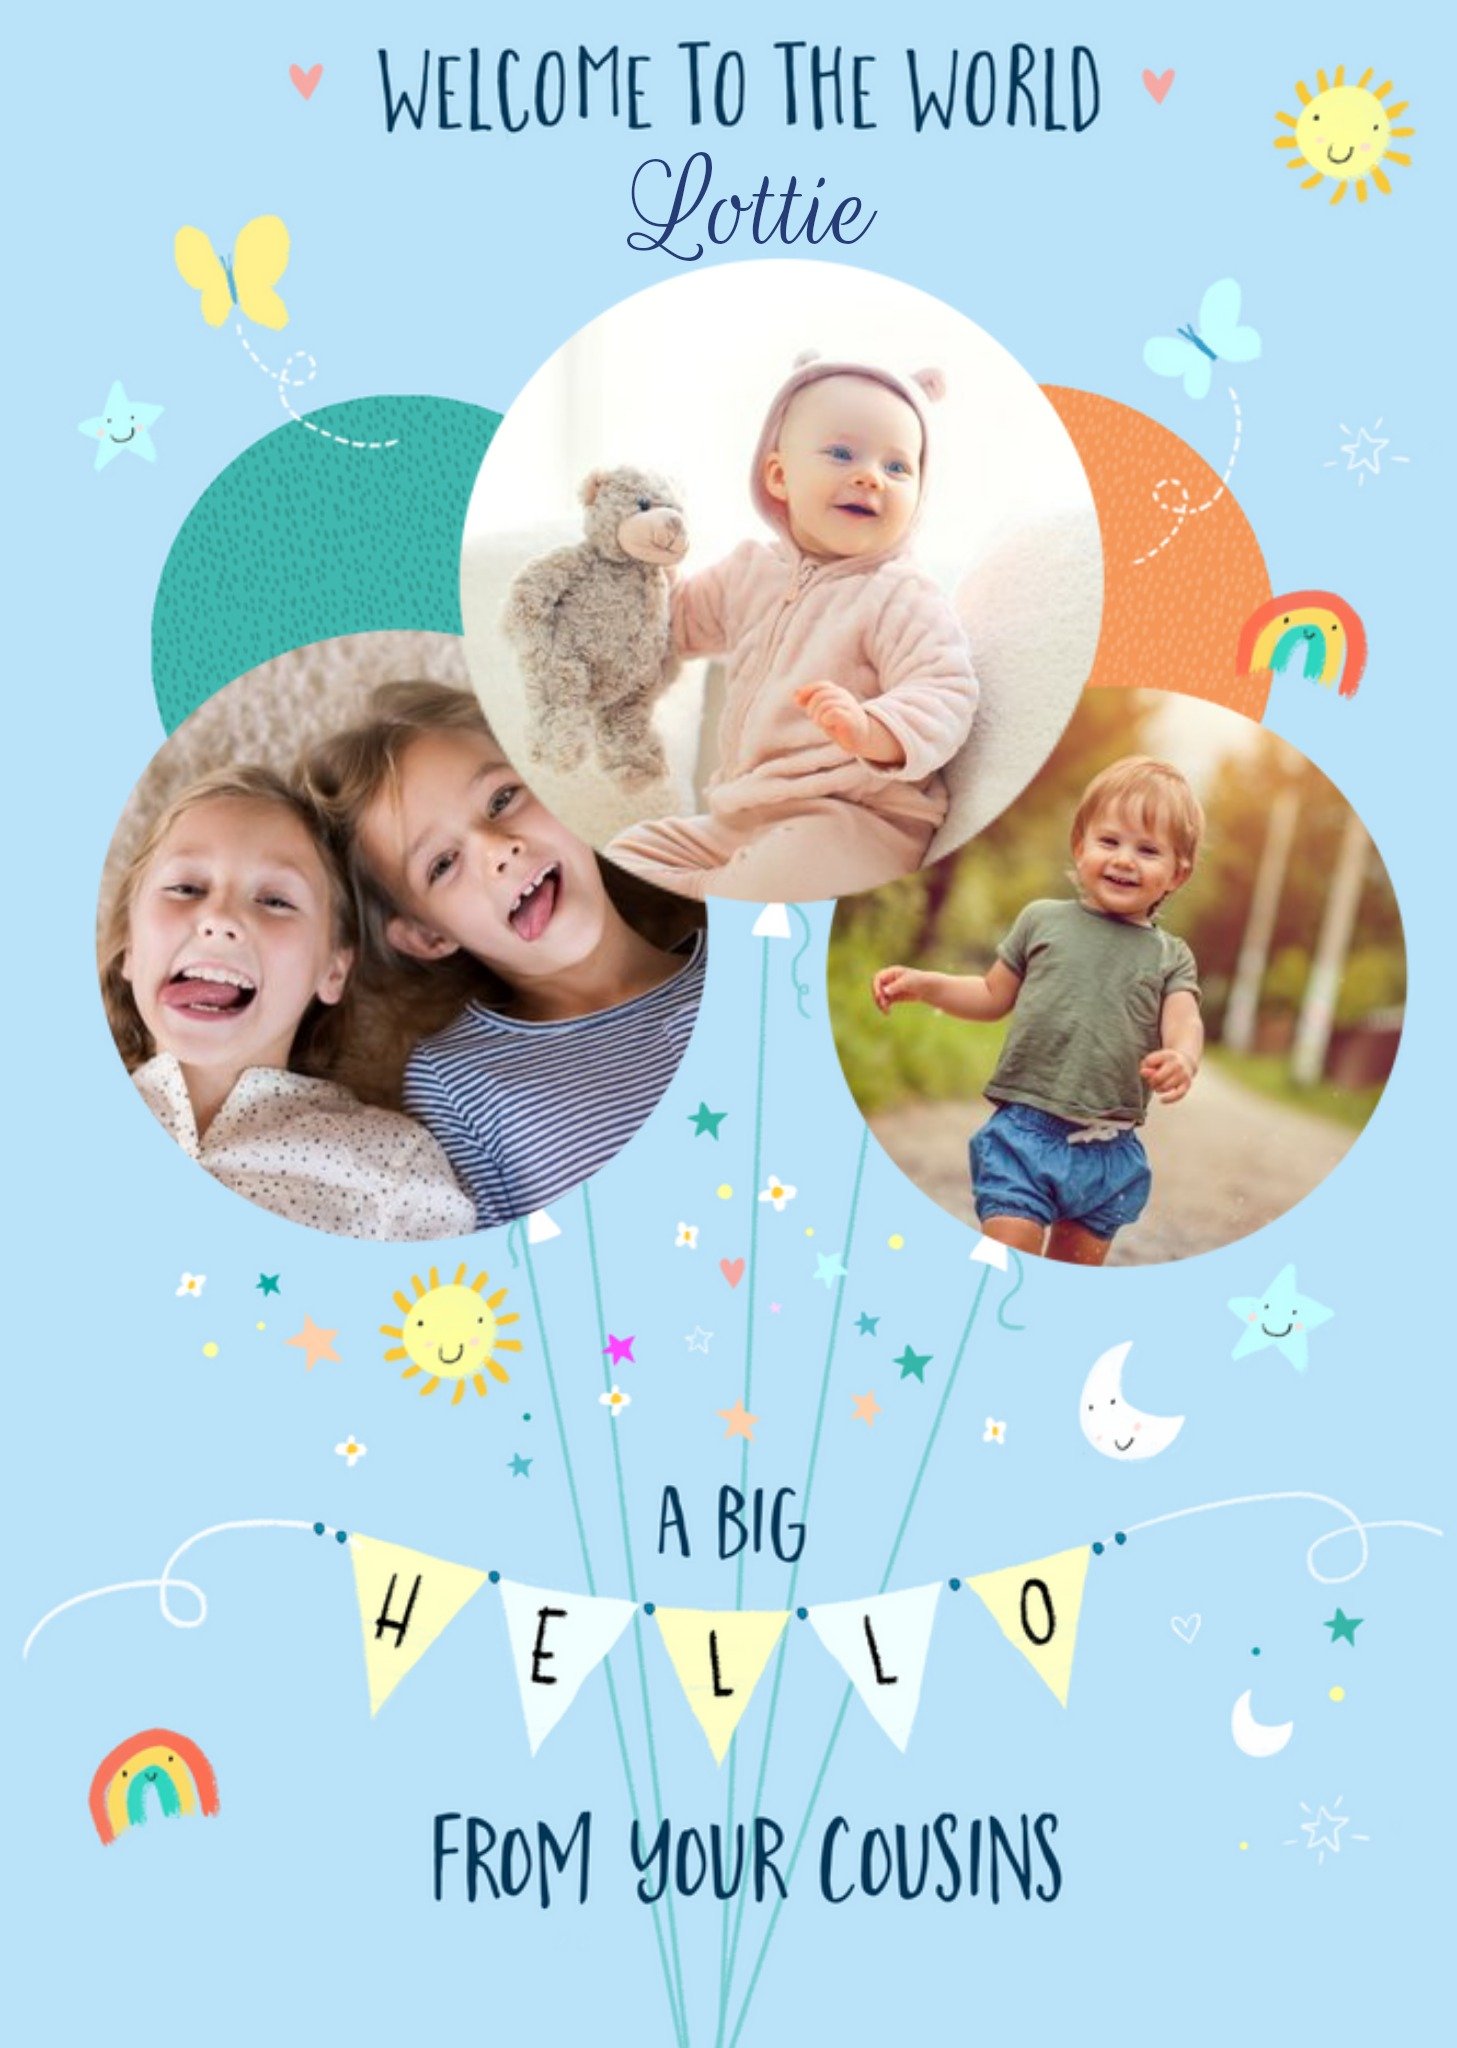 Moonpig Bright Fun Illustrated Welcome To The World A Big Hello From Your Cousins New Baby Photo Upl